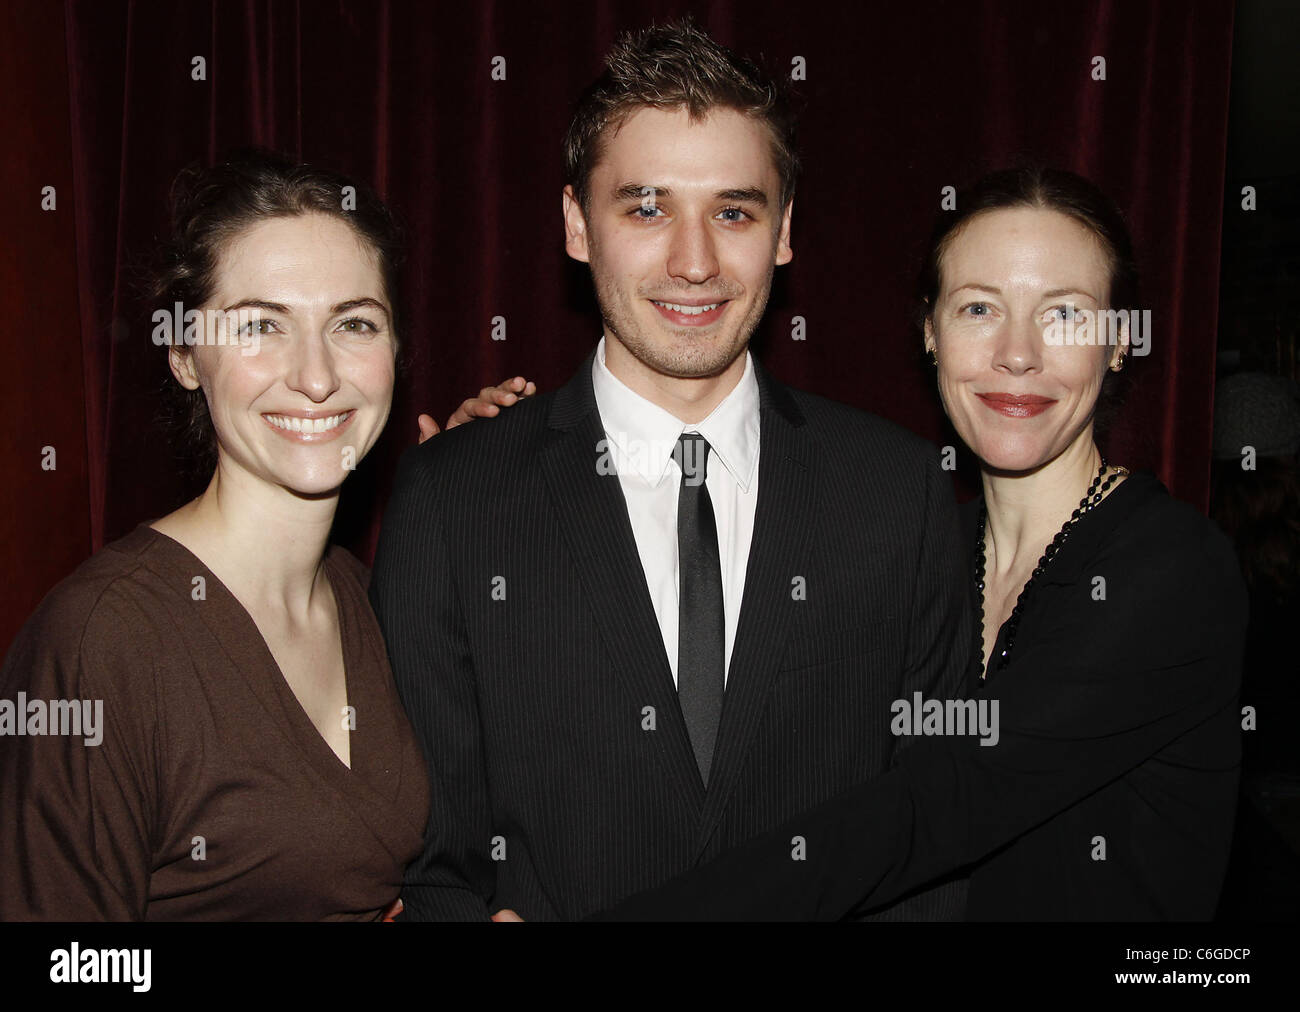 Danielle Slavick, Seth Numrich, and Veanne Cox Opening night after party for the Off-Broadway play 'Blind' held at Dublin6 New Stock Photo